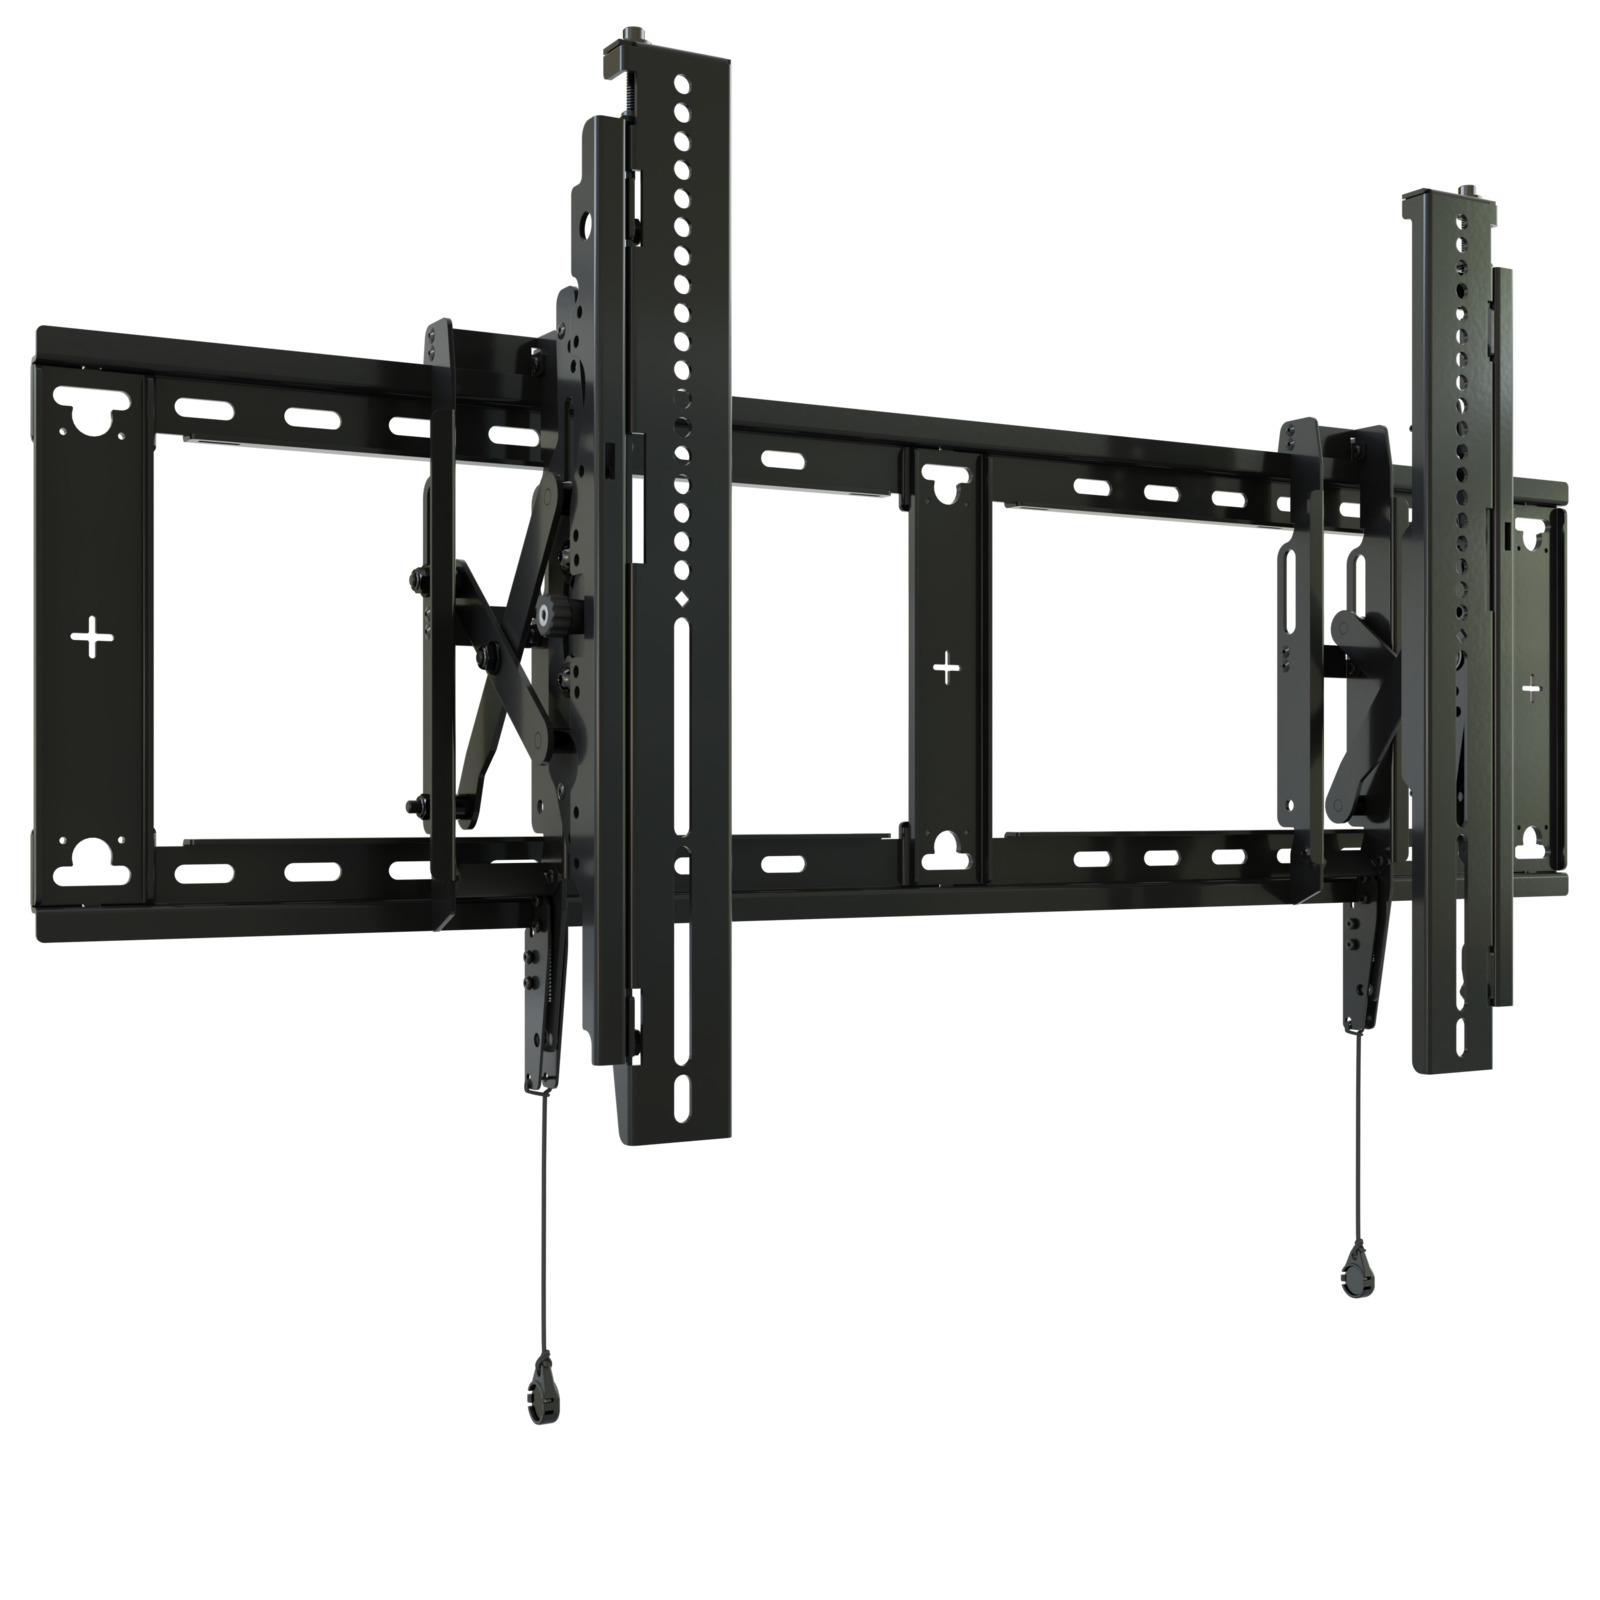 RLXT3 Large Fit Extended Tilt Display Wall Mount